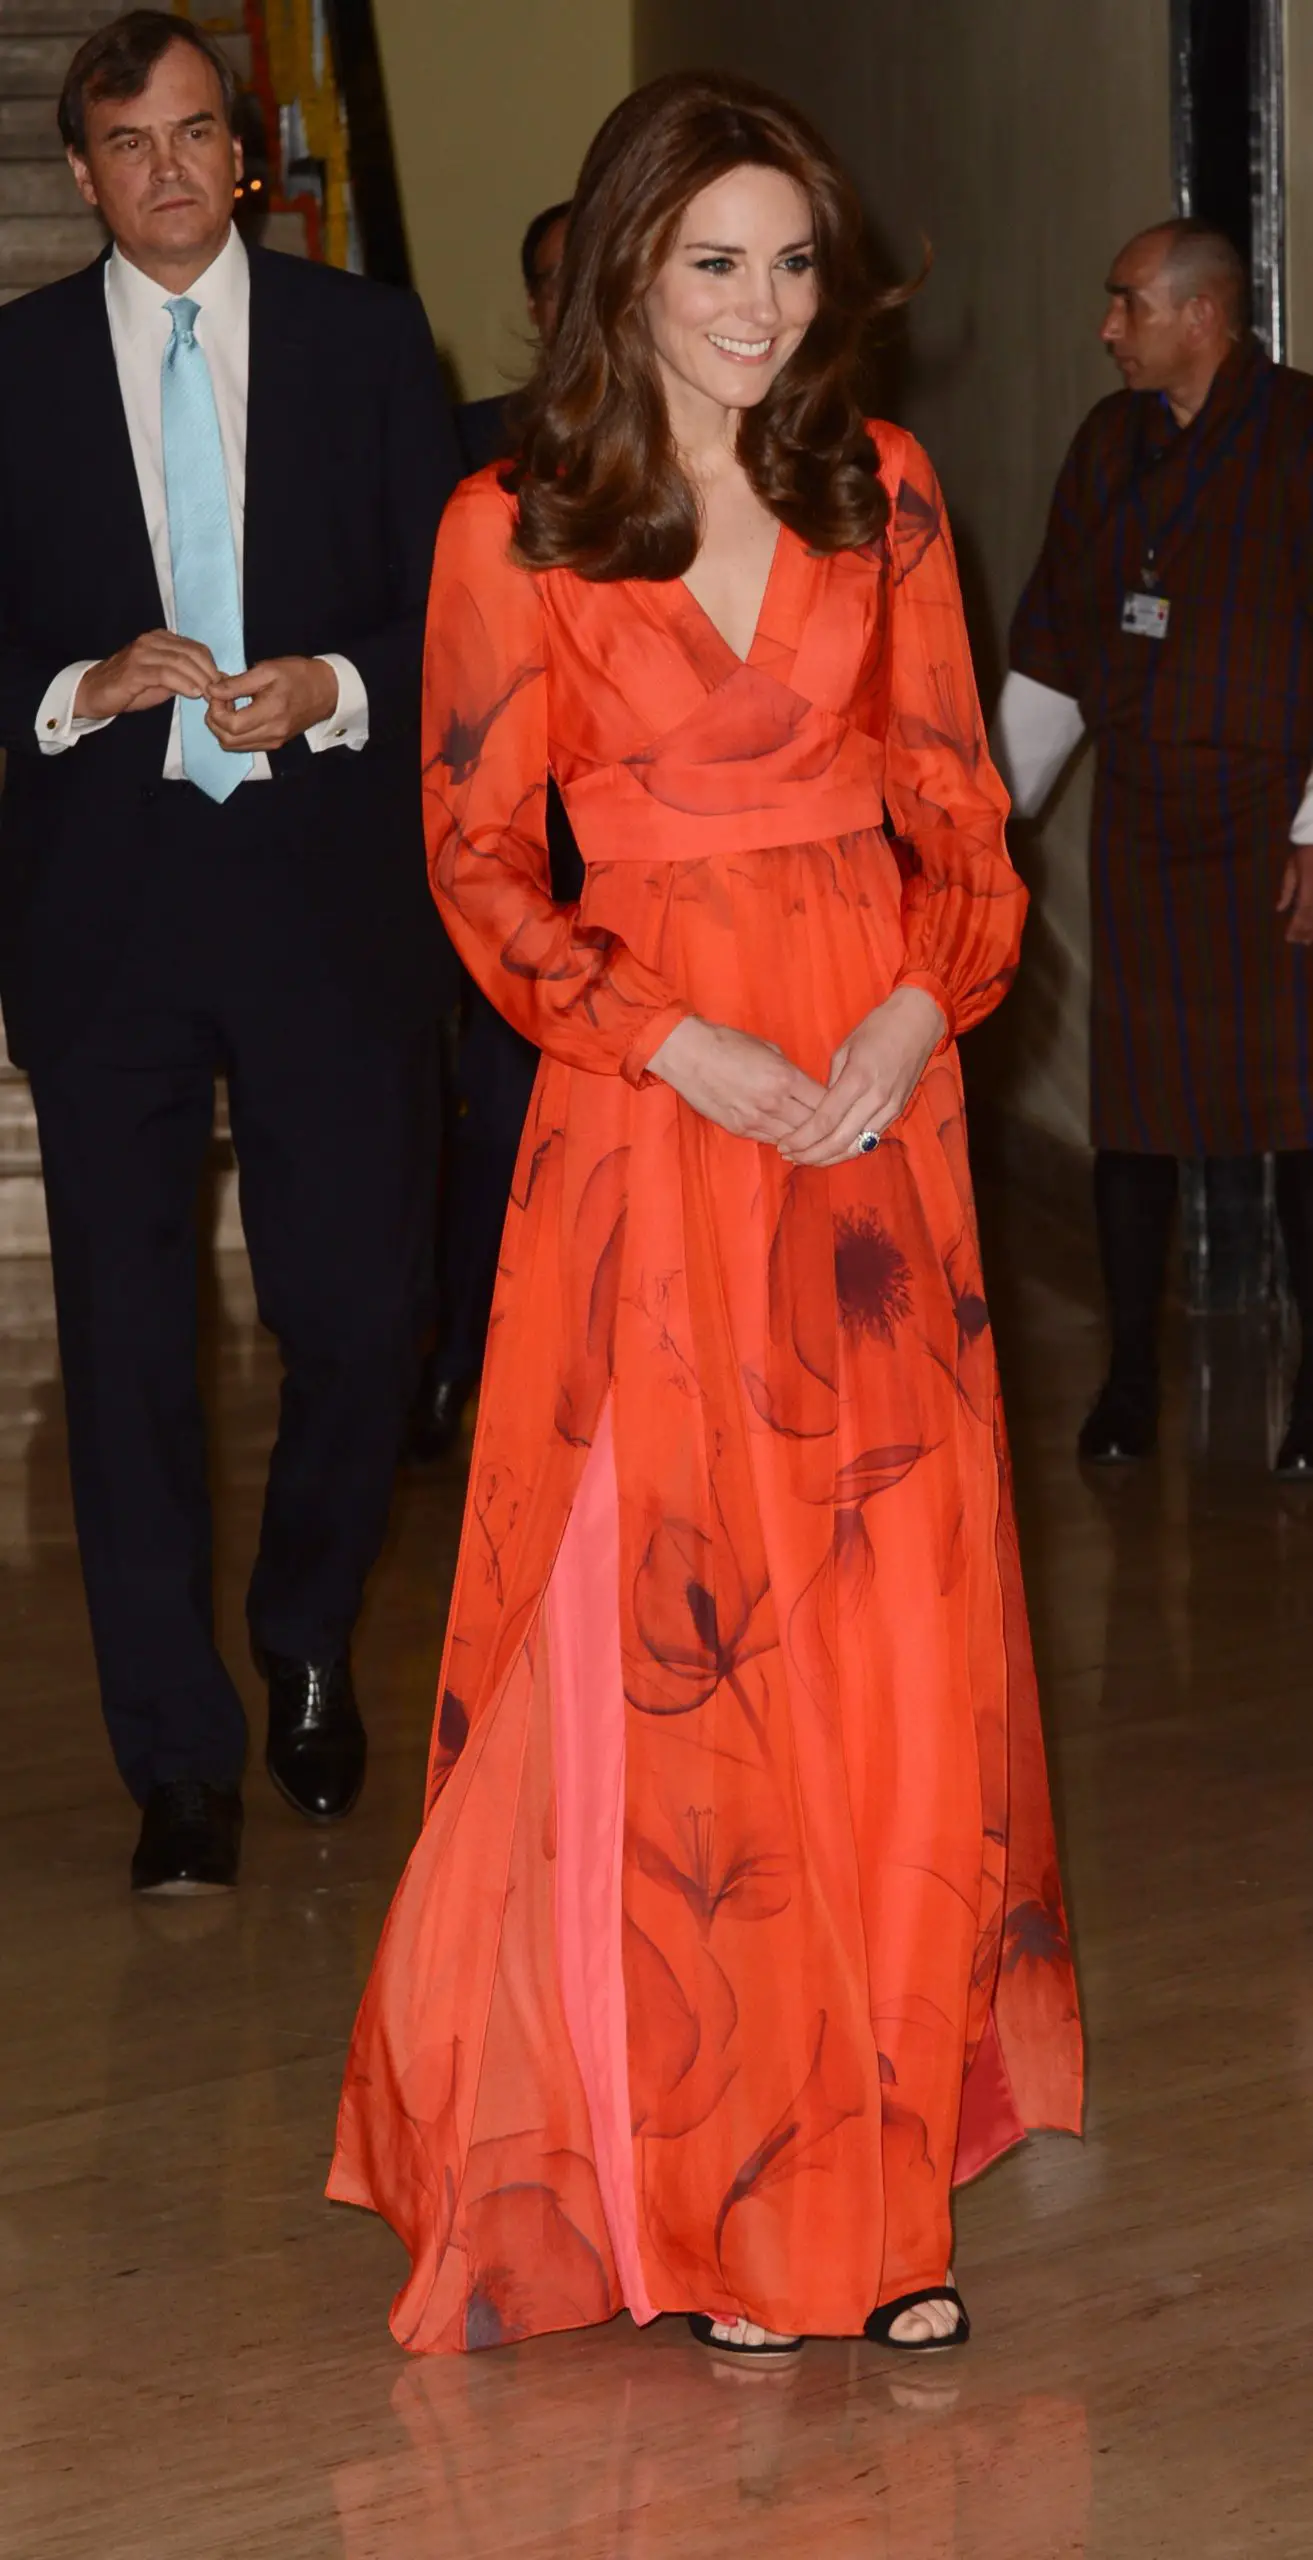 The Duchess of Cambridge was looking absolutely gorgeous in Beulah London Juliet Flower Spirits Gown